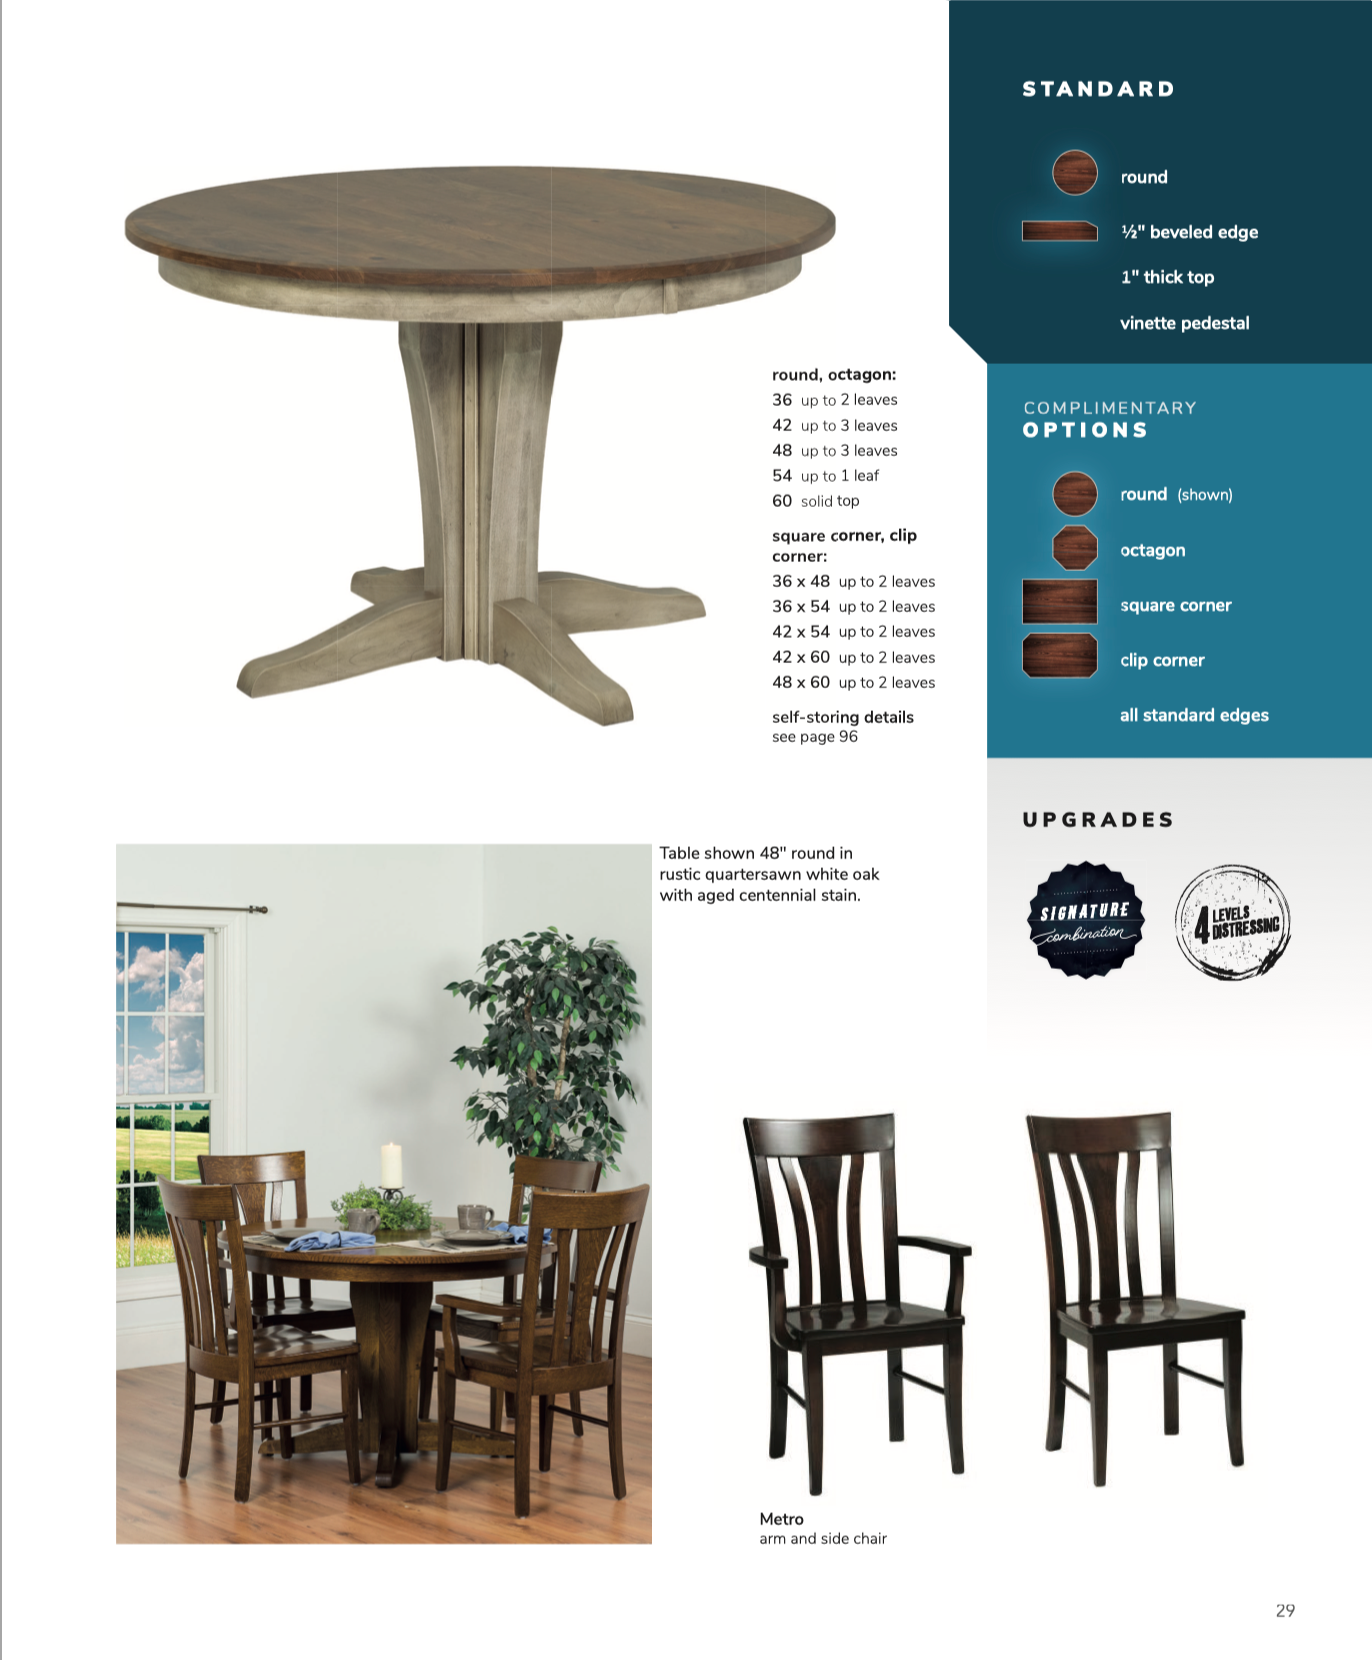 Vinette Table and Chair Set